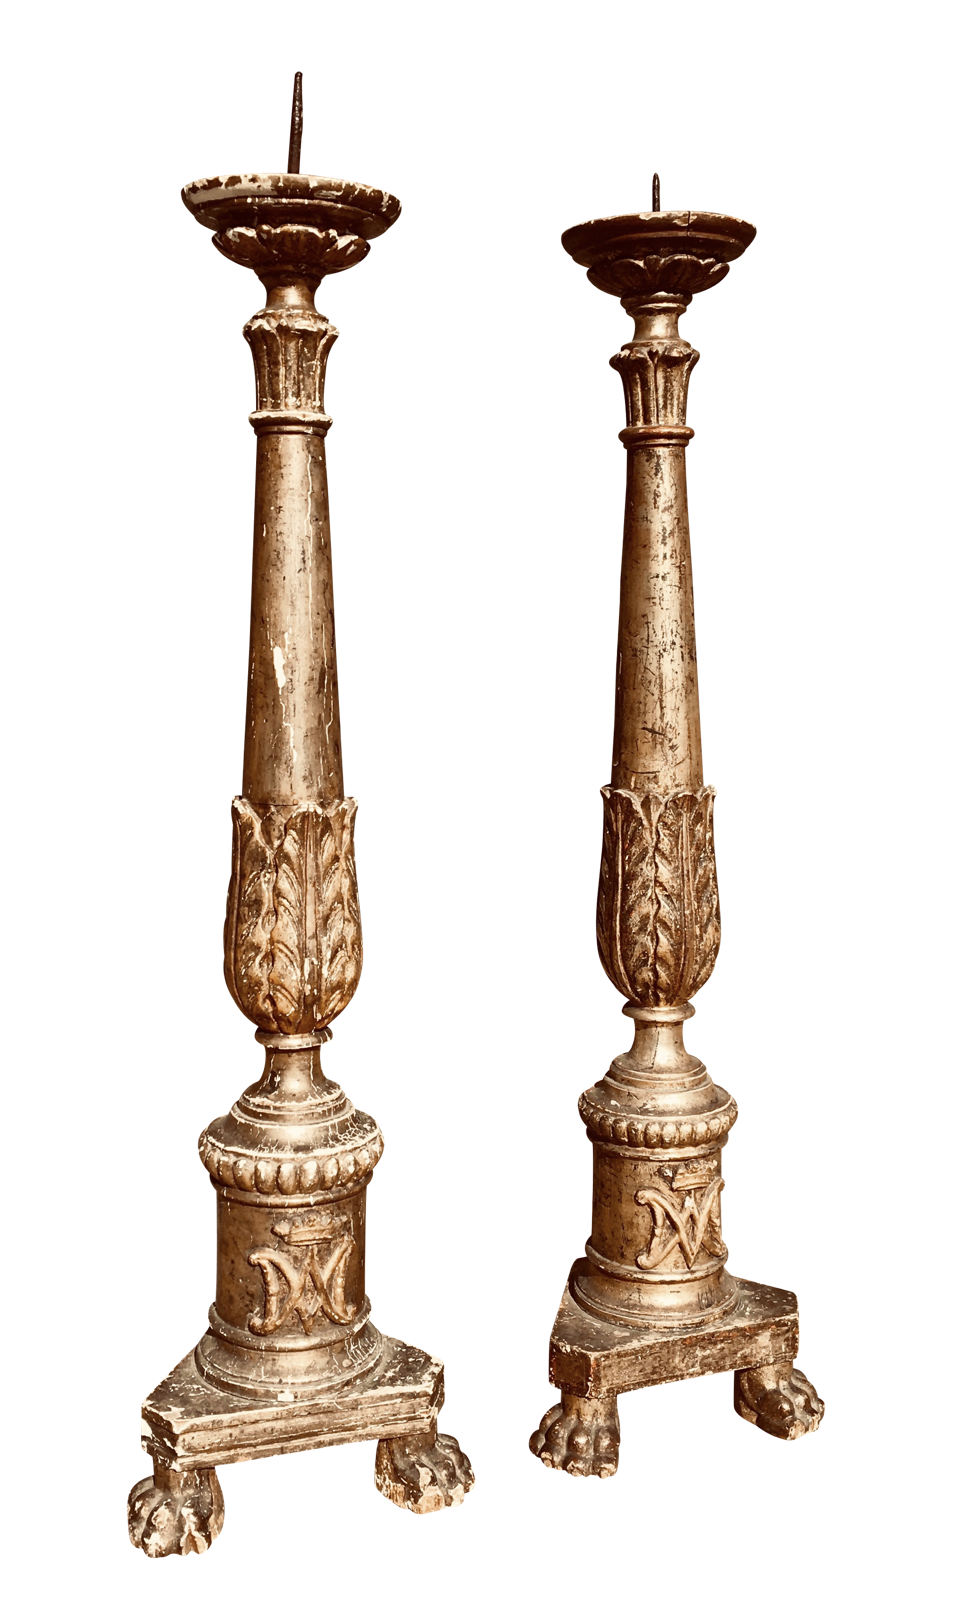 Louis XVI - 18th Century French Carved Gilt Wood Pricket Sticks - Marie Antoinette - Helen Storey Antiques